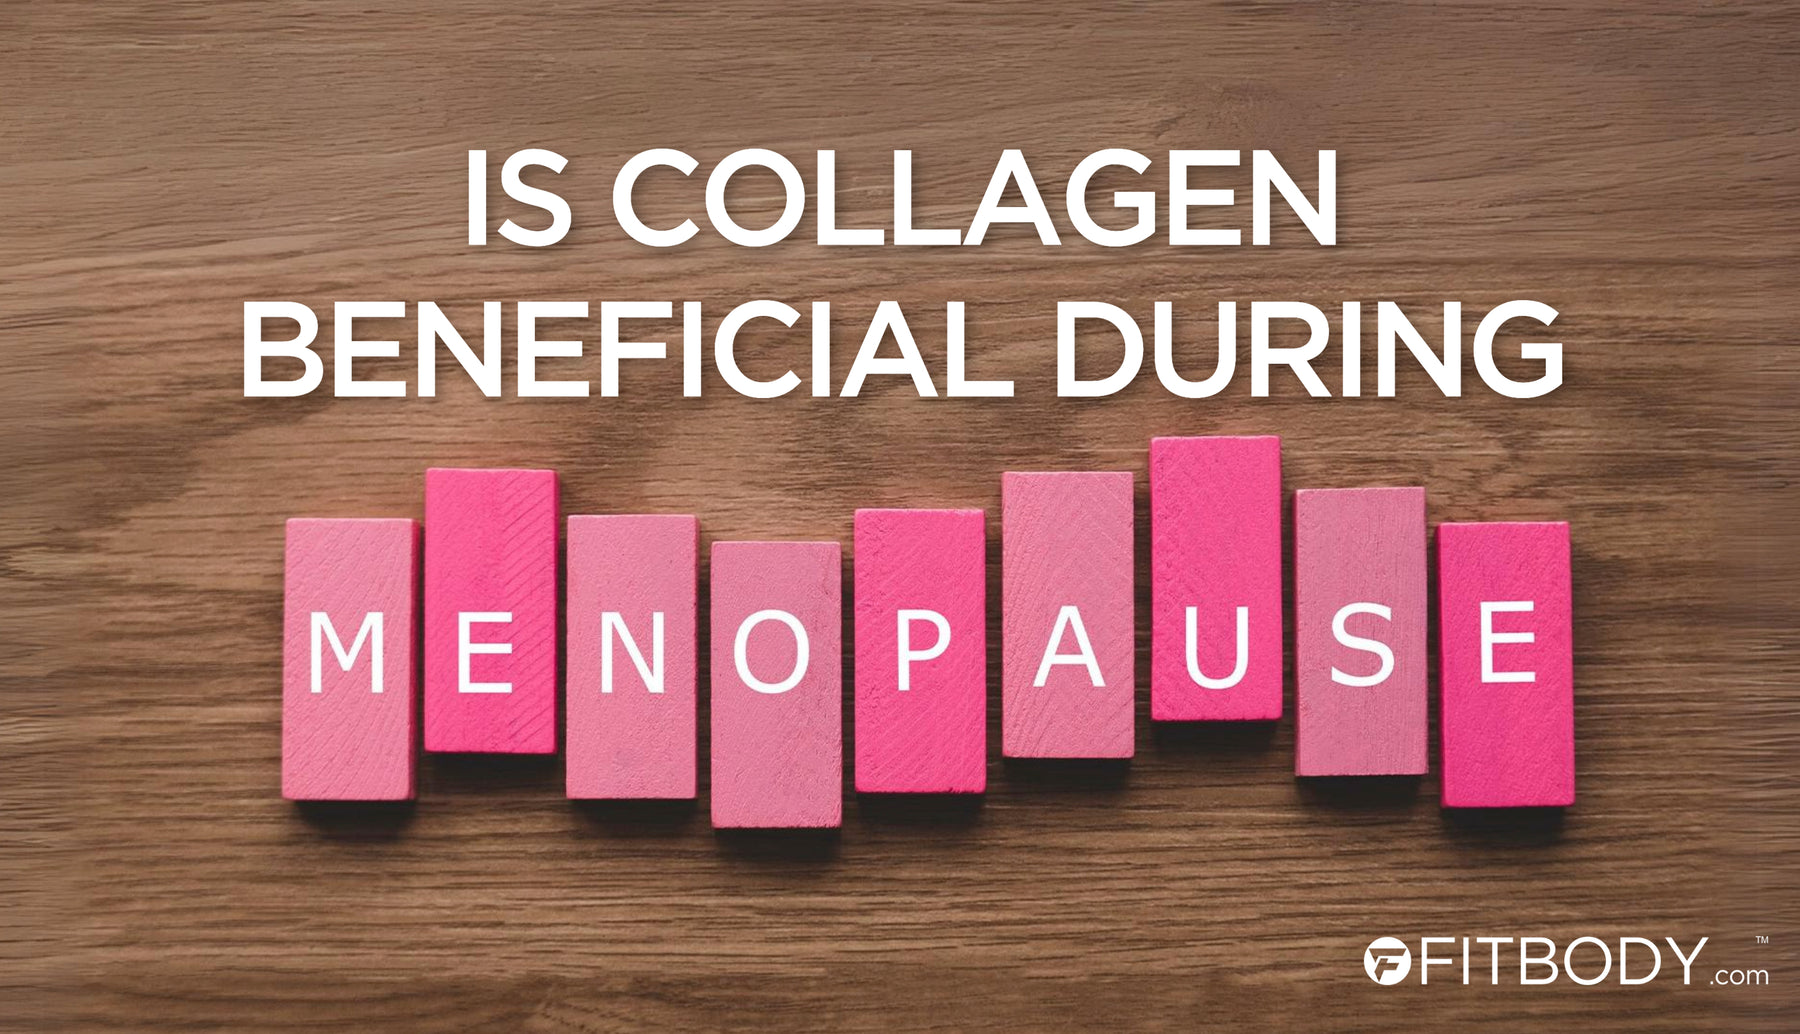 Is Collagen Beneficial During Menopause?